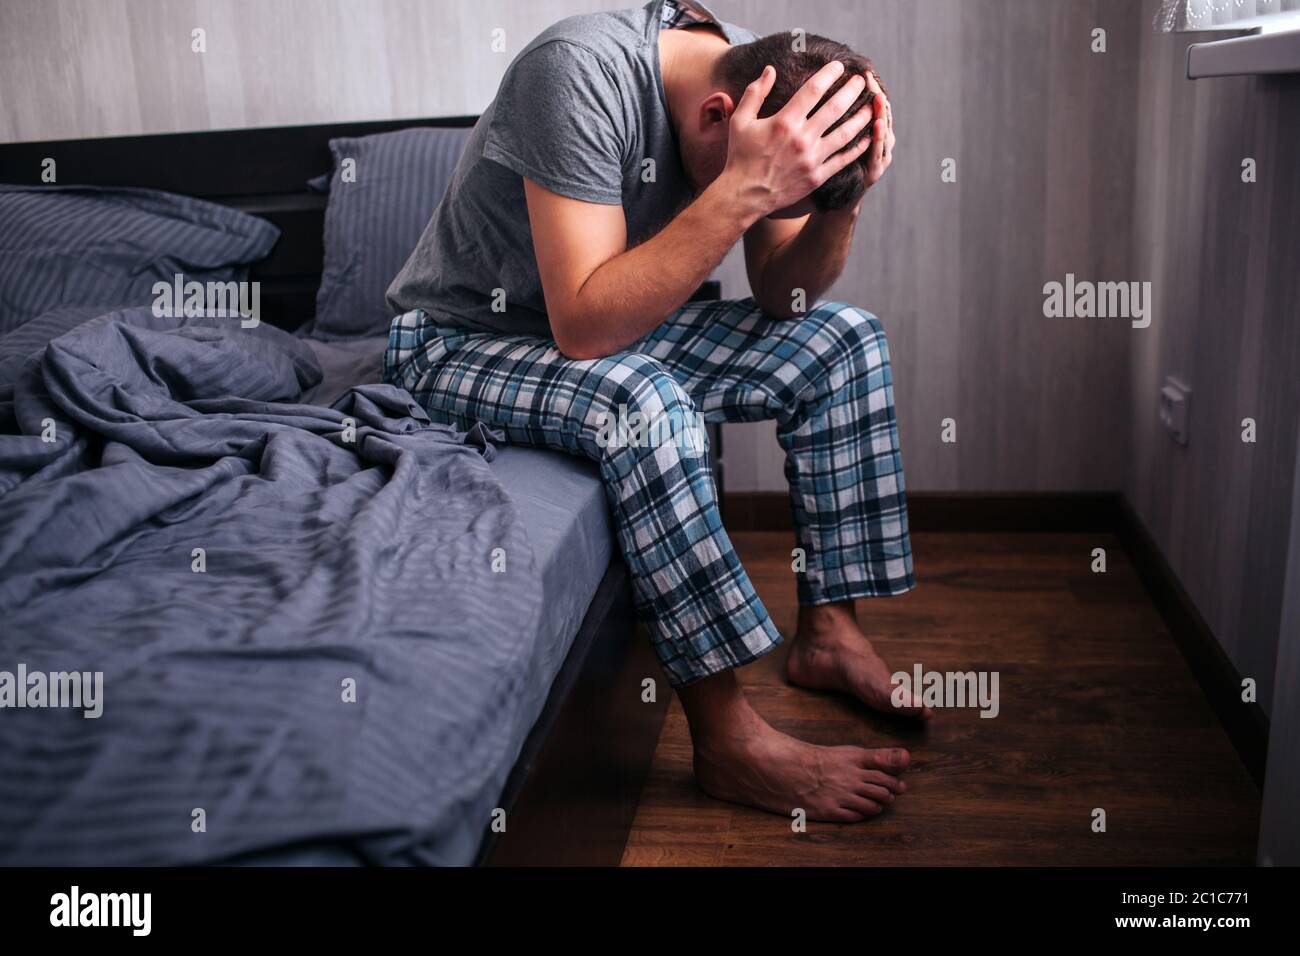 bad mood in the morning. Men's health problems. Impotence or prostatitis in a male model. Stock Photo